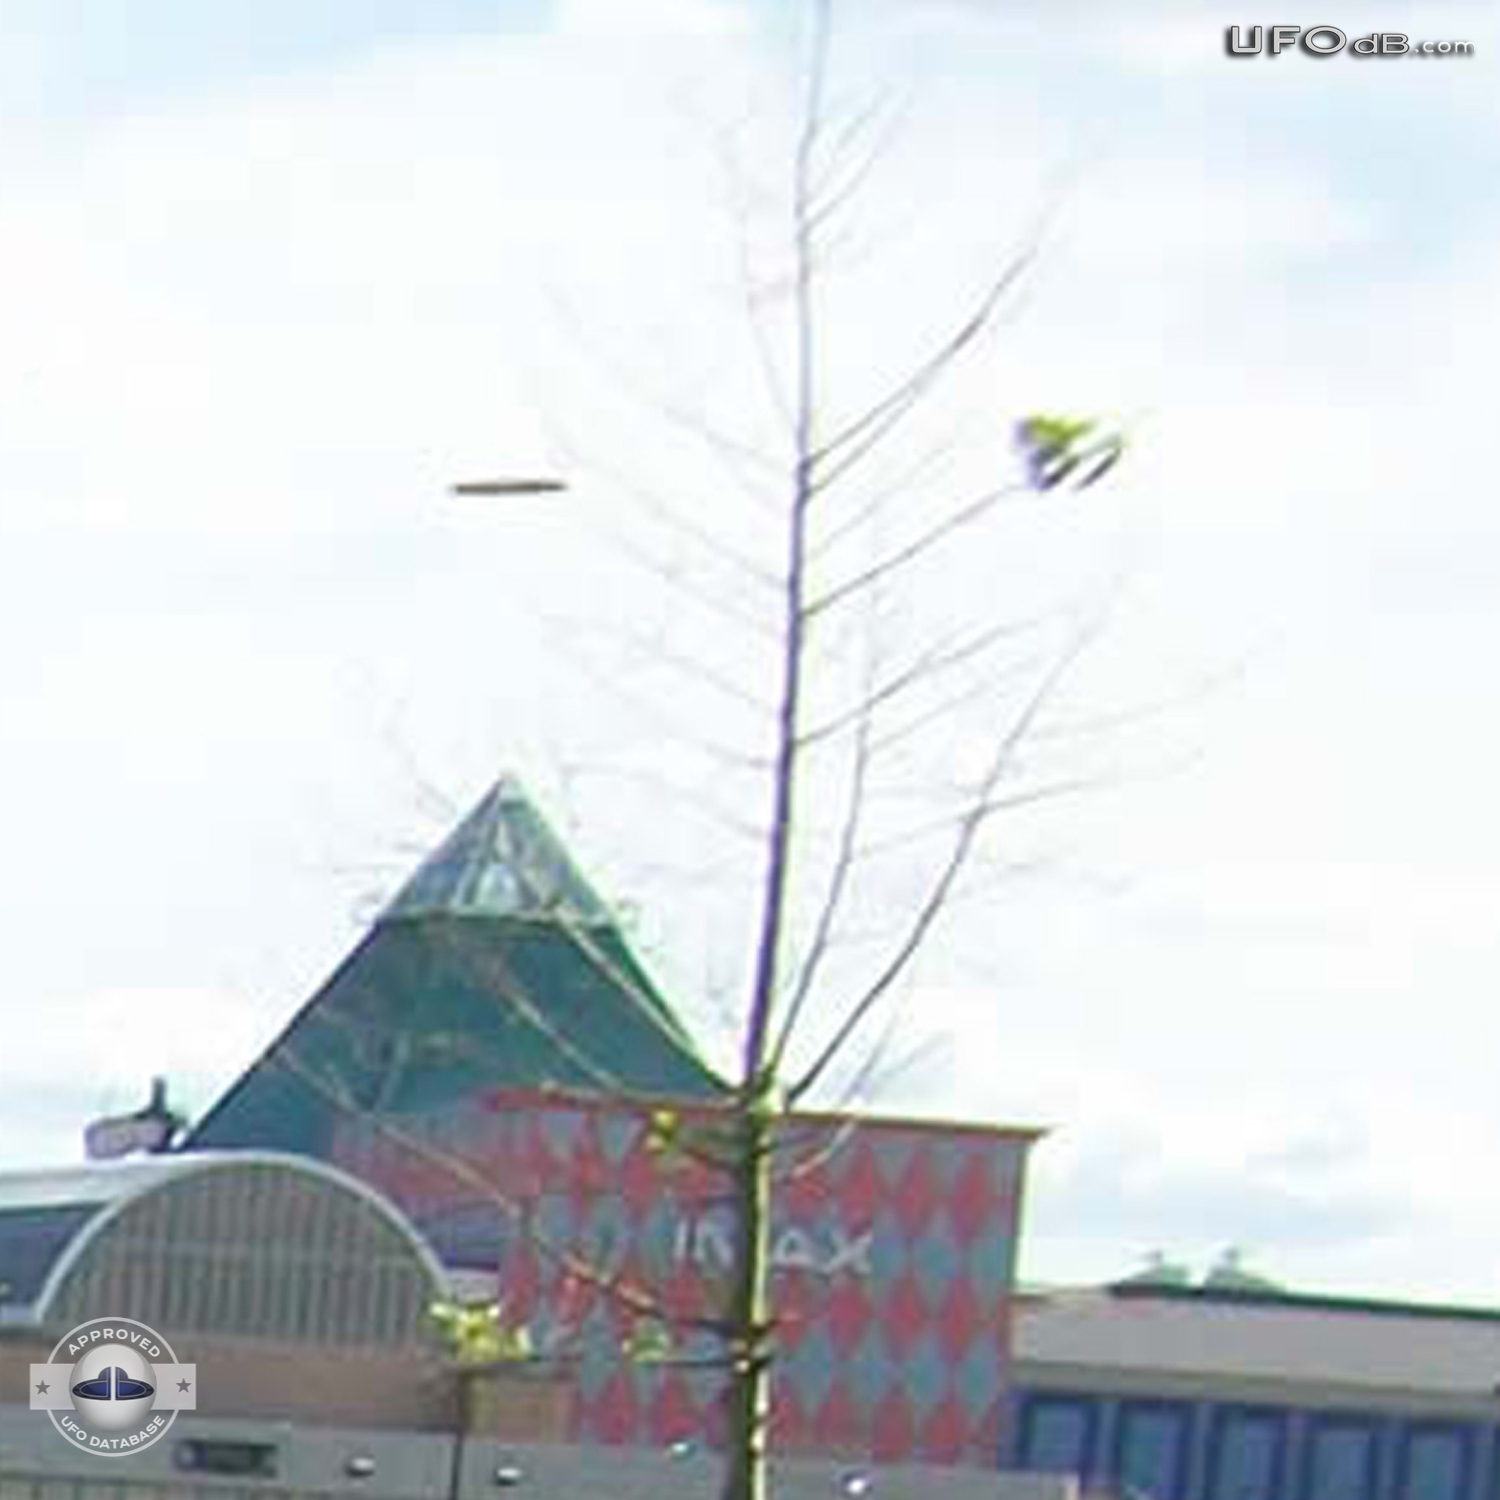 West Edmonton Mall visited by a UFO | Alberta, Canada | May 21 2011 UFO Picture #321-2